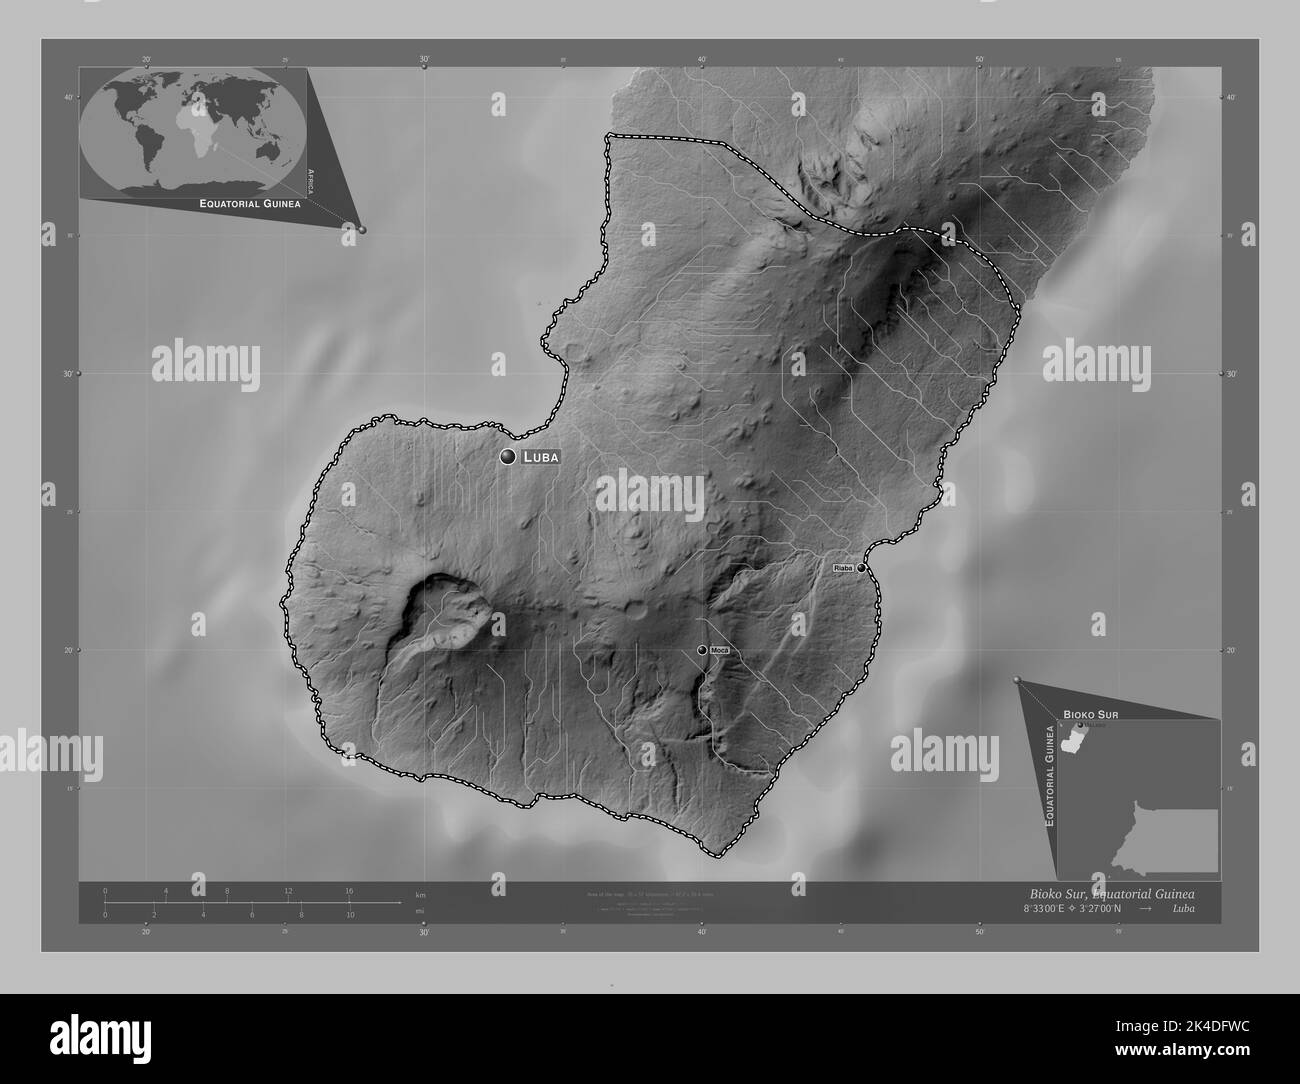 Bioko Sur, province of Equatorial Guinea. Grayscale elevation map with lakes and rivers. Locations and names of major cities of the region. Corner aux Stock Photo